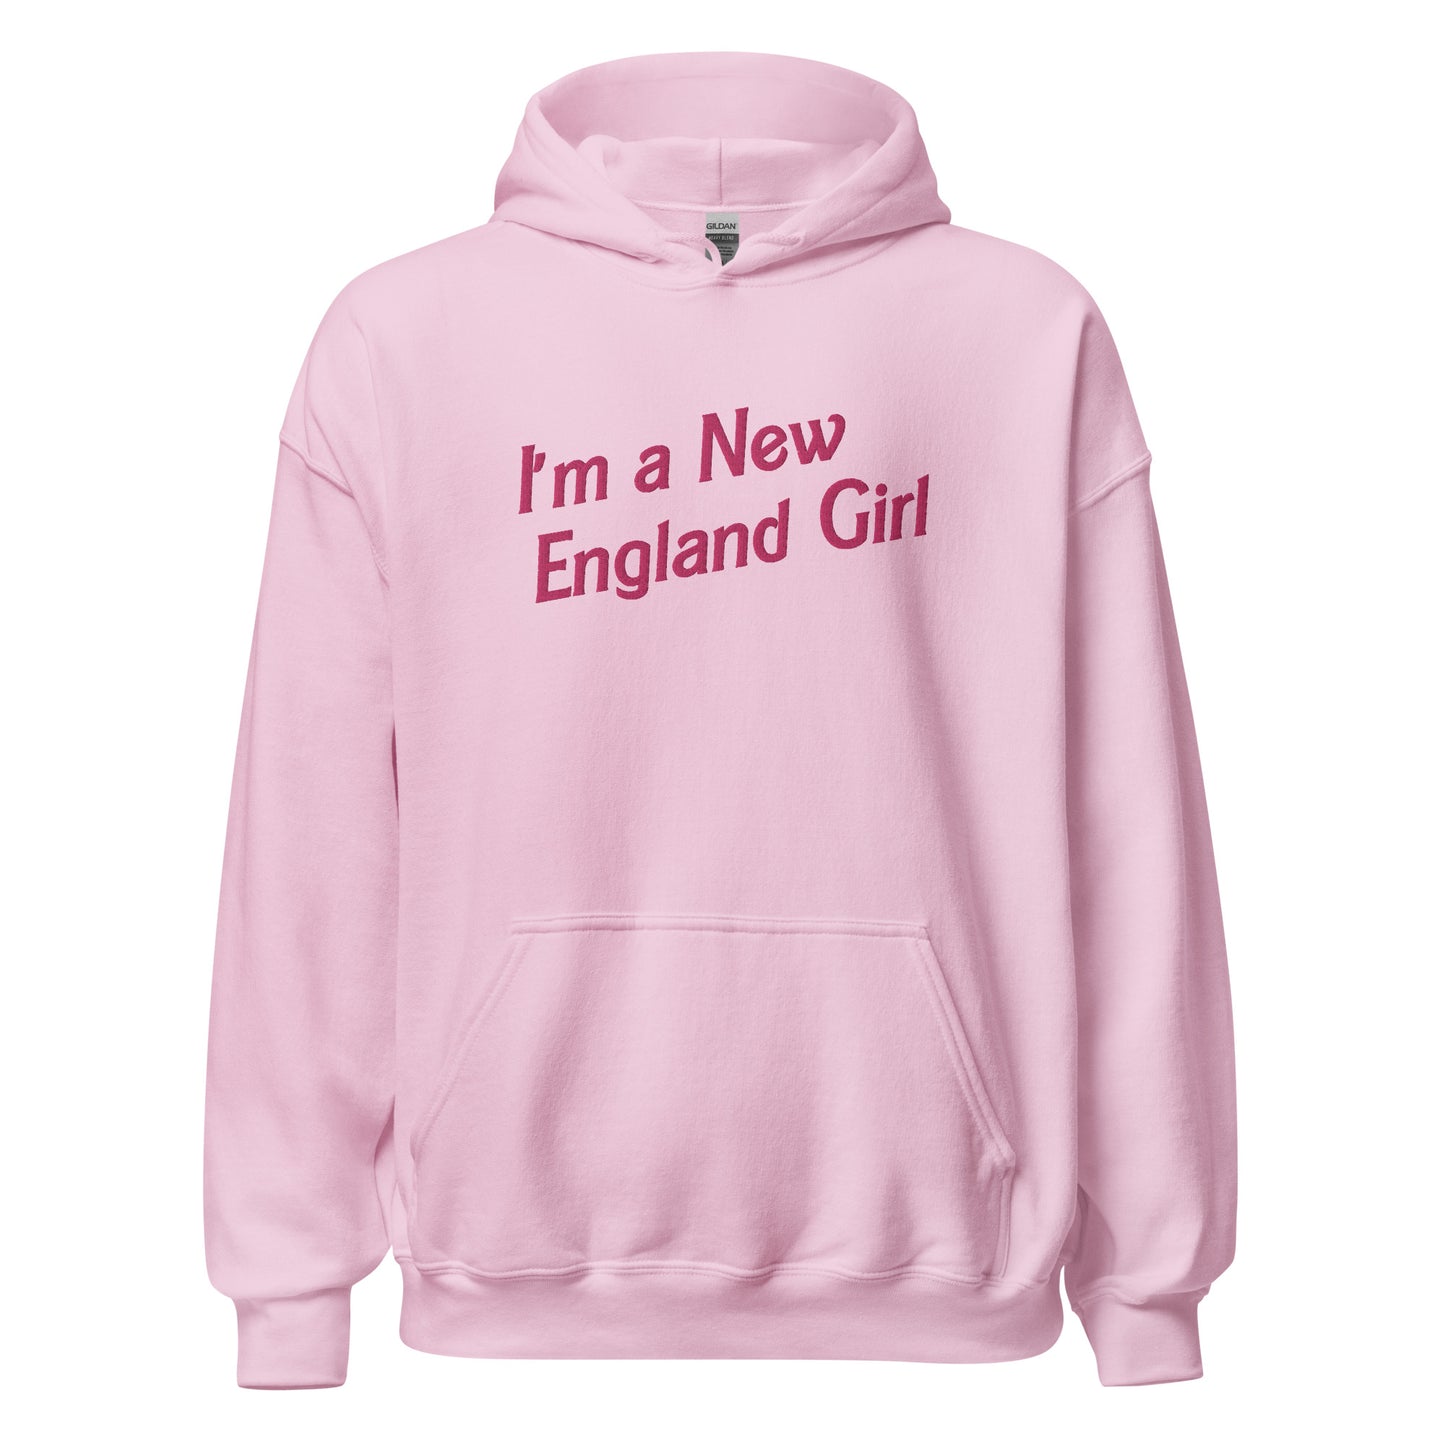 I'm a New England Girl Embroidered Hoodie